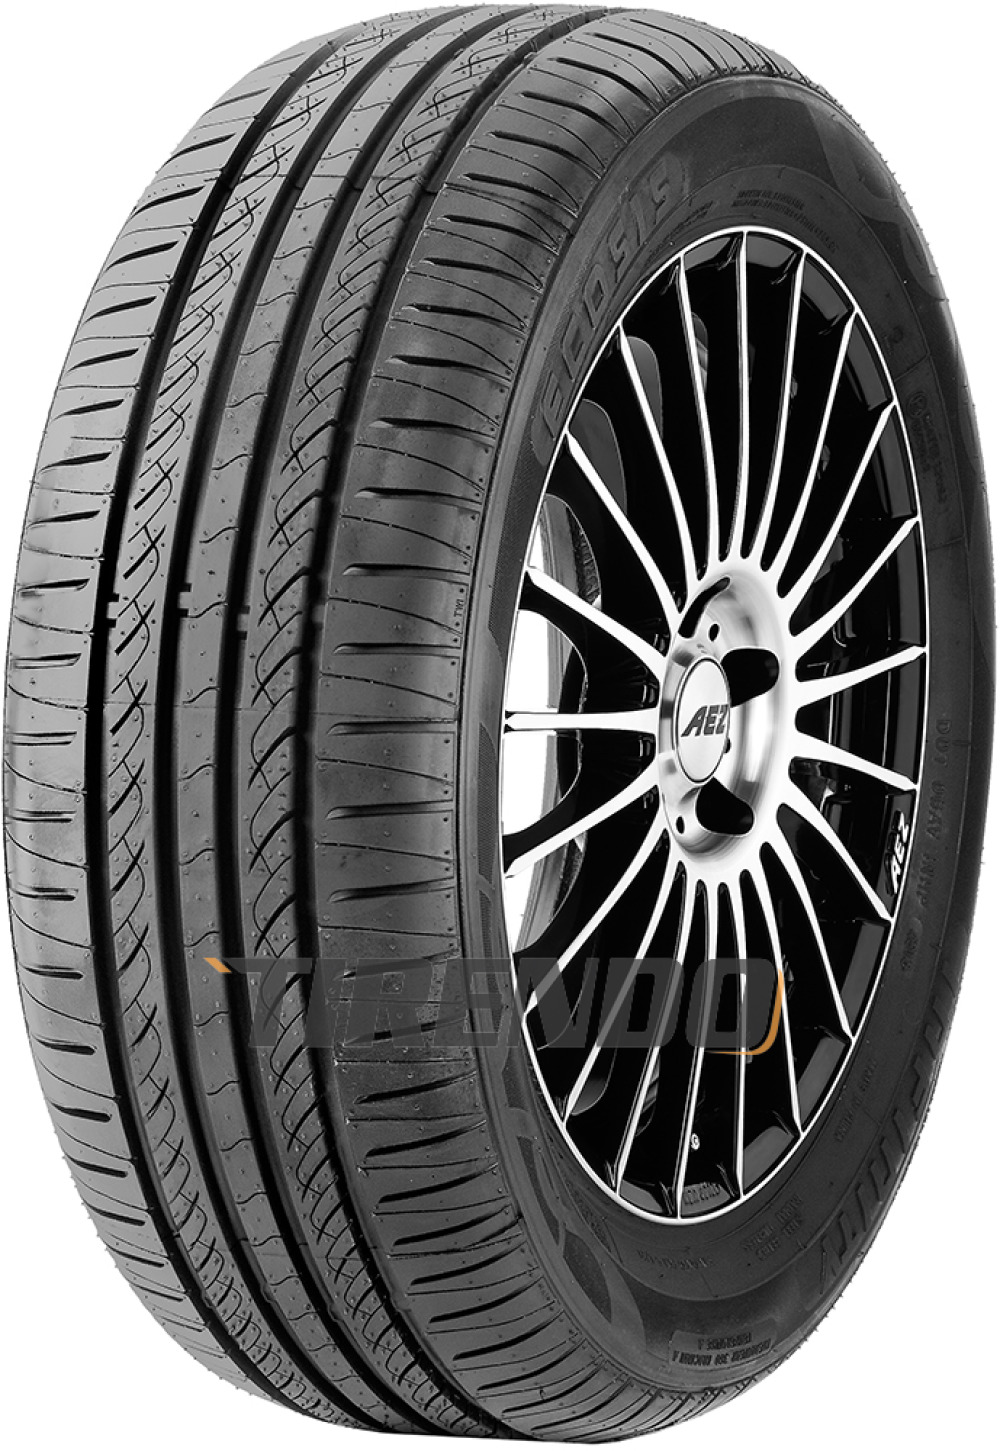 INFINITY ECOSIS 185/60 R 14 82H